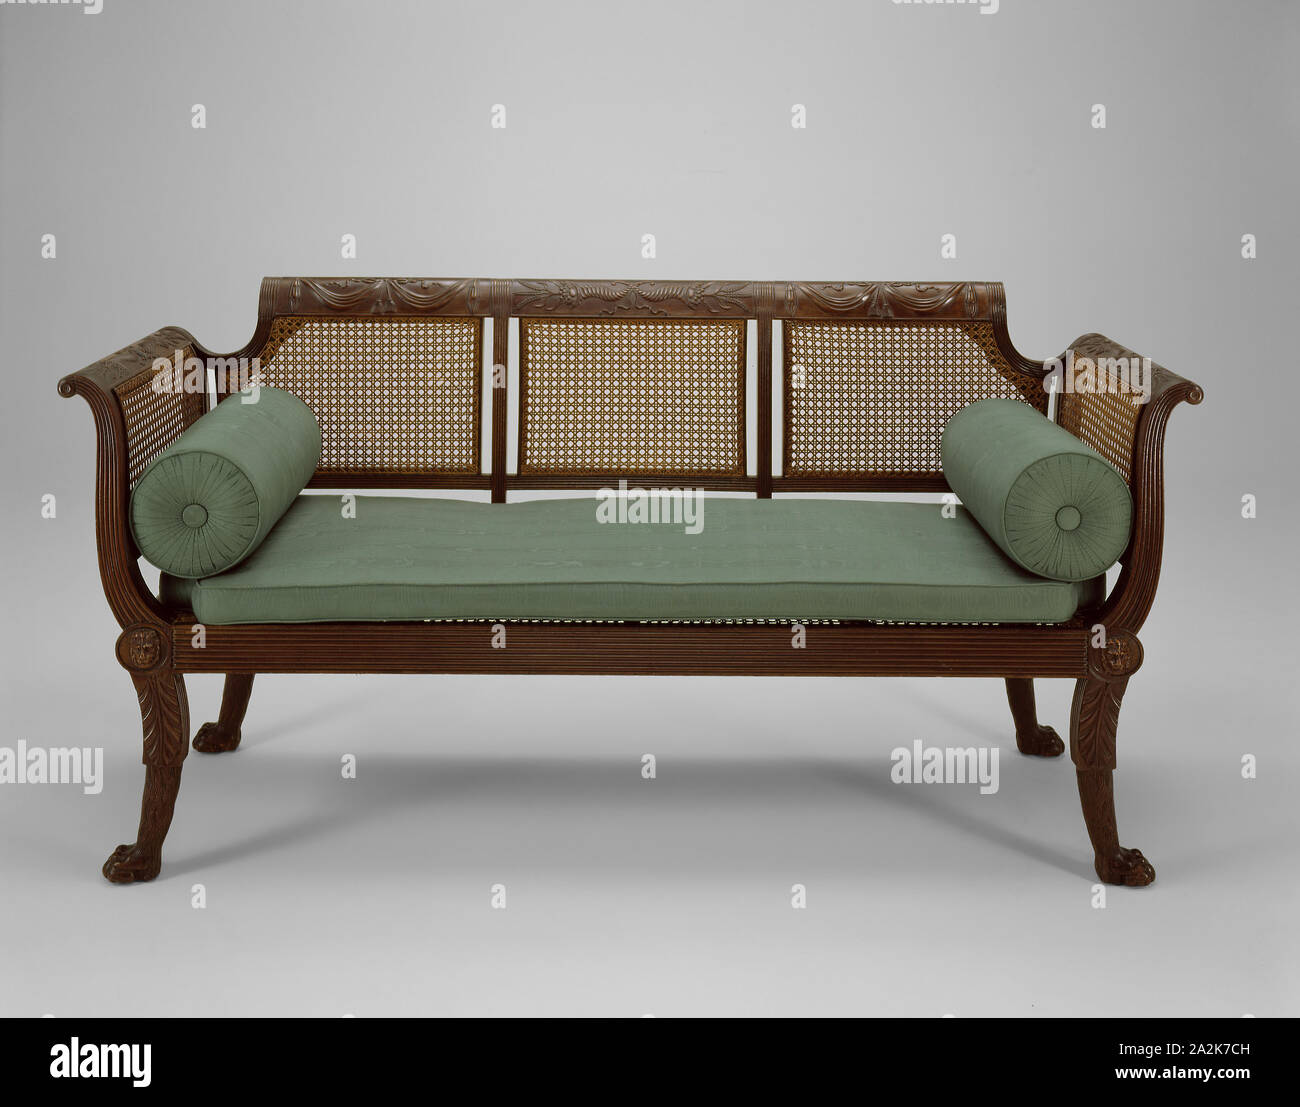 Settee, 1815/20, American, 18th/19th century, New York, New York City, Mahogany with caning, 90.2 × 183.3 × 58.4 cm (35 1/2 × 72 3/8 × 23 in Stock Photo